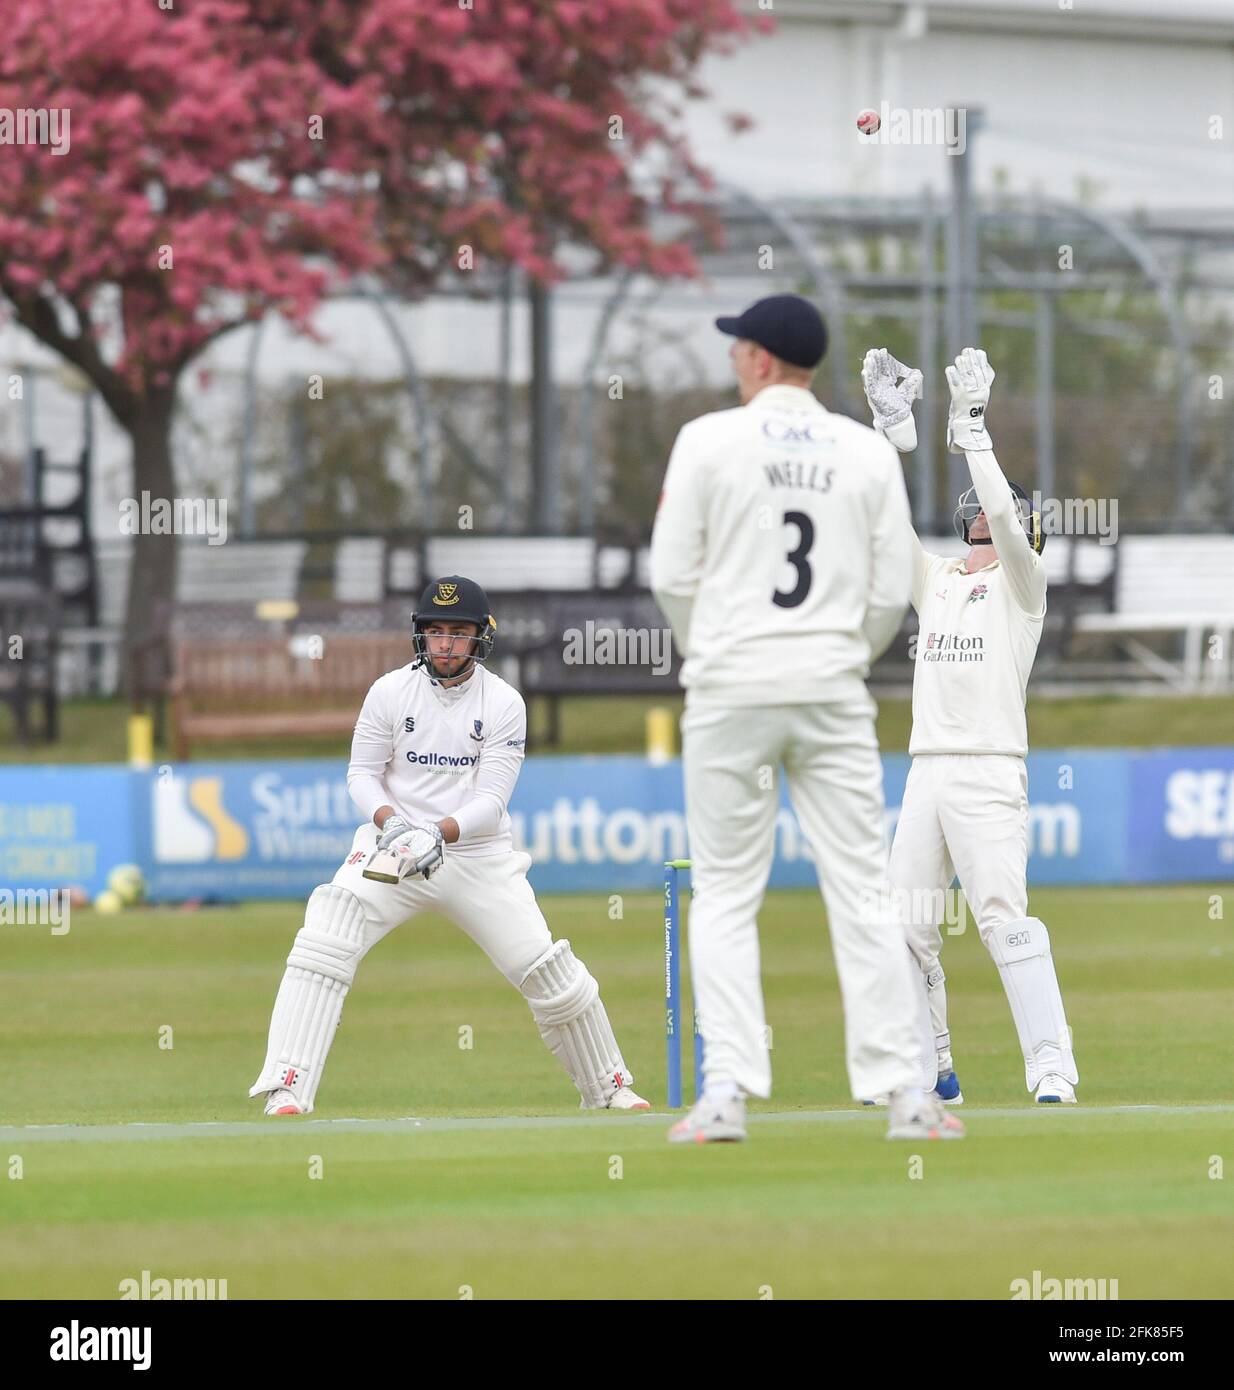 Hove UK 29th April 2021 - Tom Haines batting for Sussex against Lancashire on the first day of their LV= Insurance County Championship match at The 1st Central County Ground  in Hove . : Credit Simon Dack / Alamy Live News Stock Photo